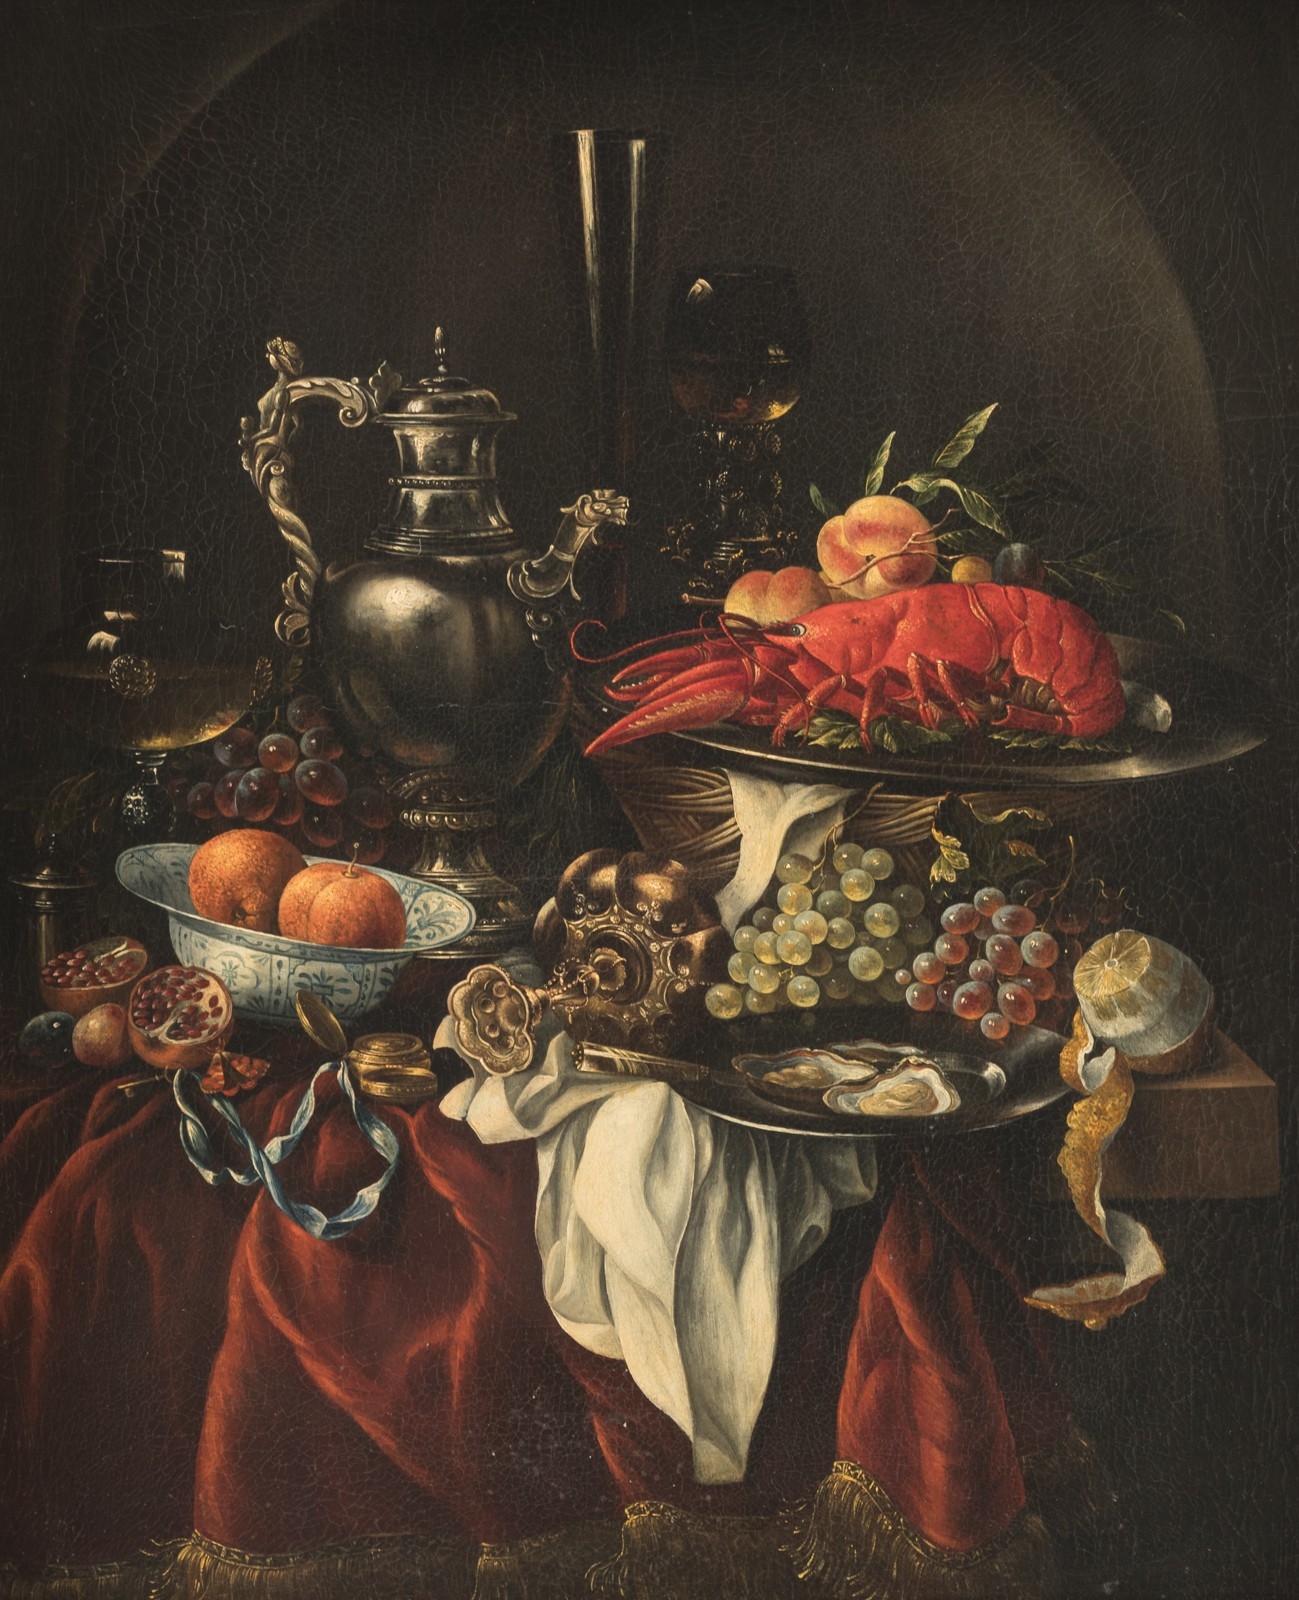 Artwork by Willem Kalf, A Still Life with Lobster, Made of Oil on canvas